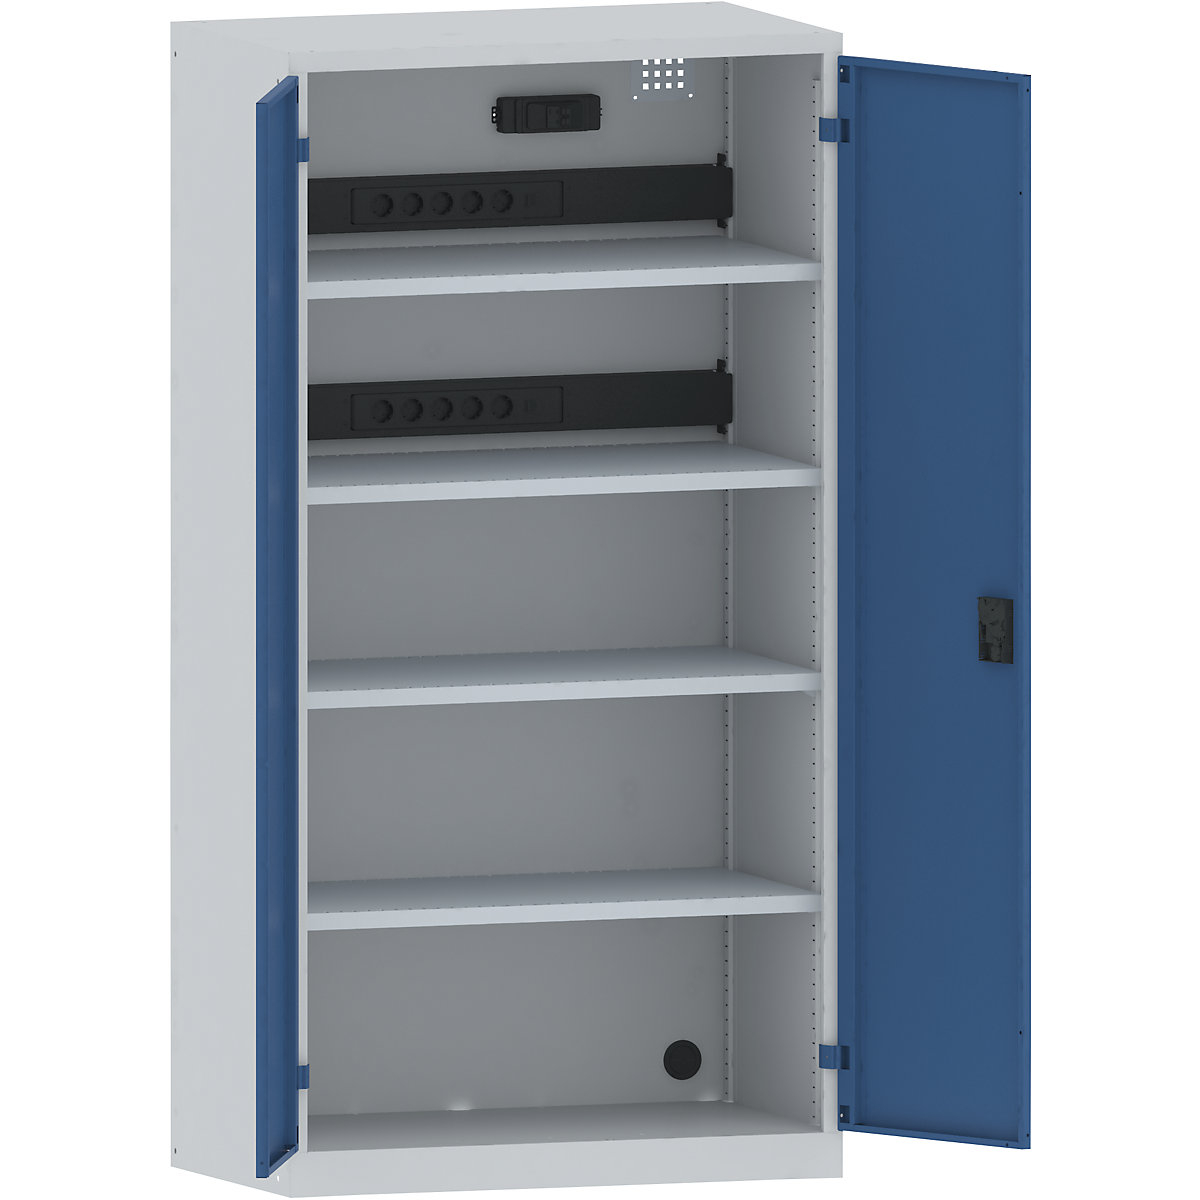 Battery charging cabinet – LISTA, 4 shelves, solid panel doors, 2 power strips at rear with RCD/circuit breaker, grey / blue-18